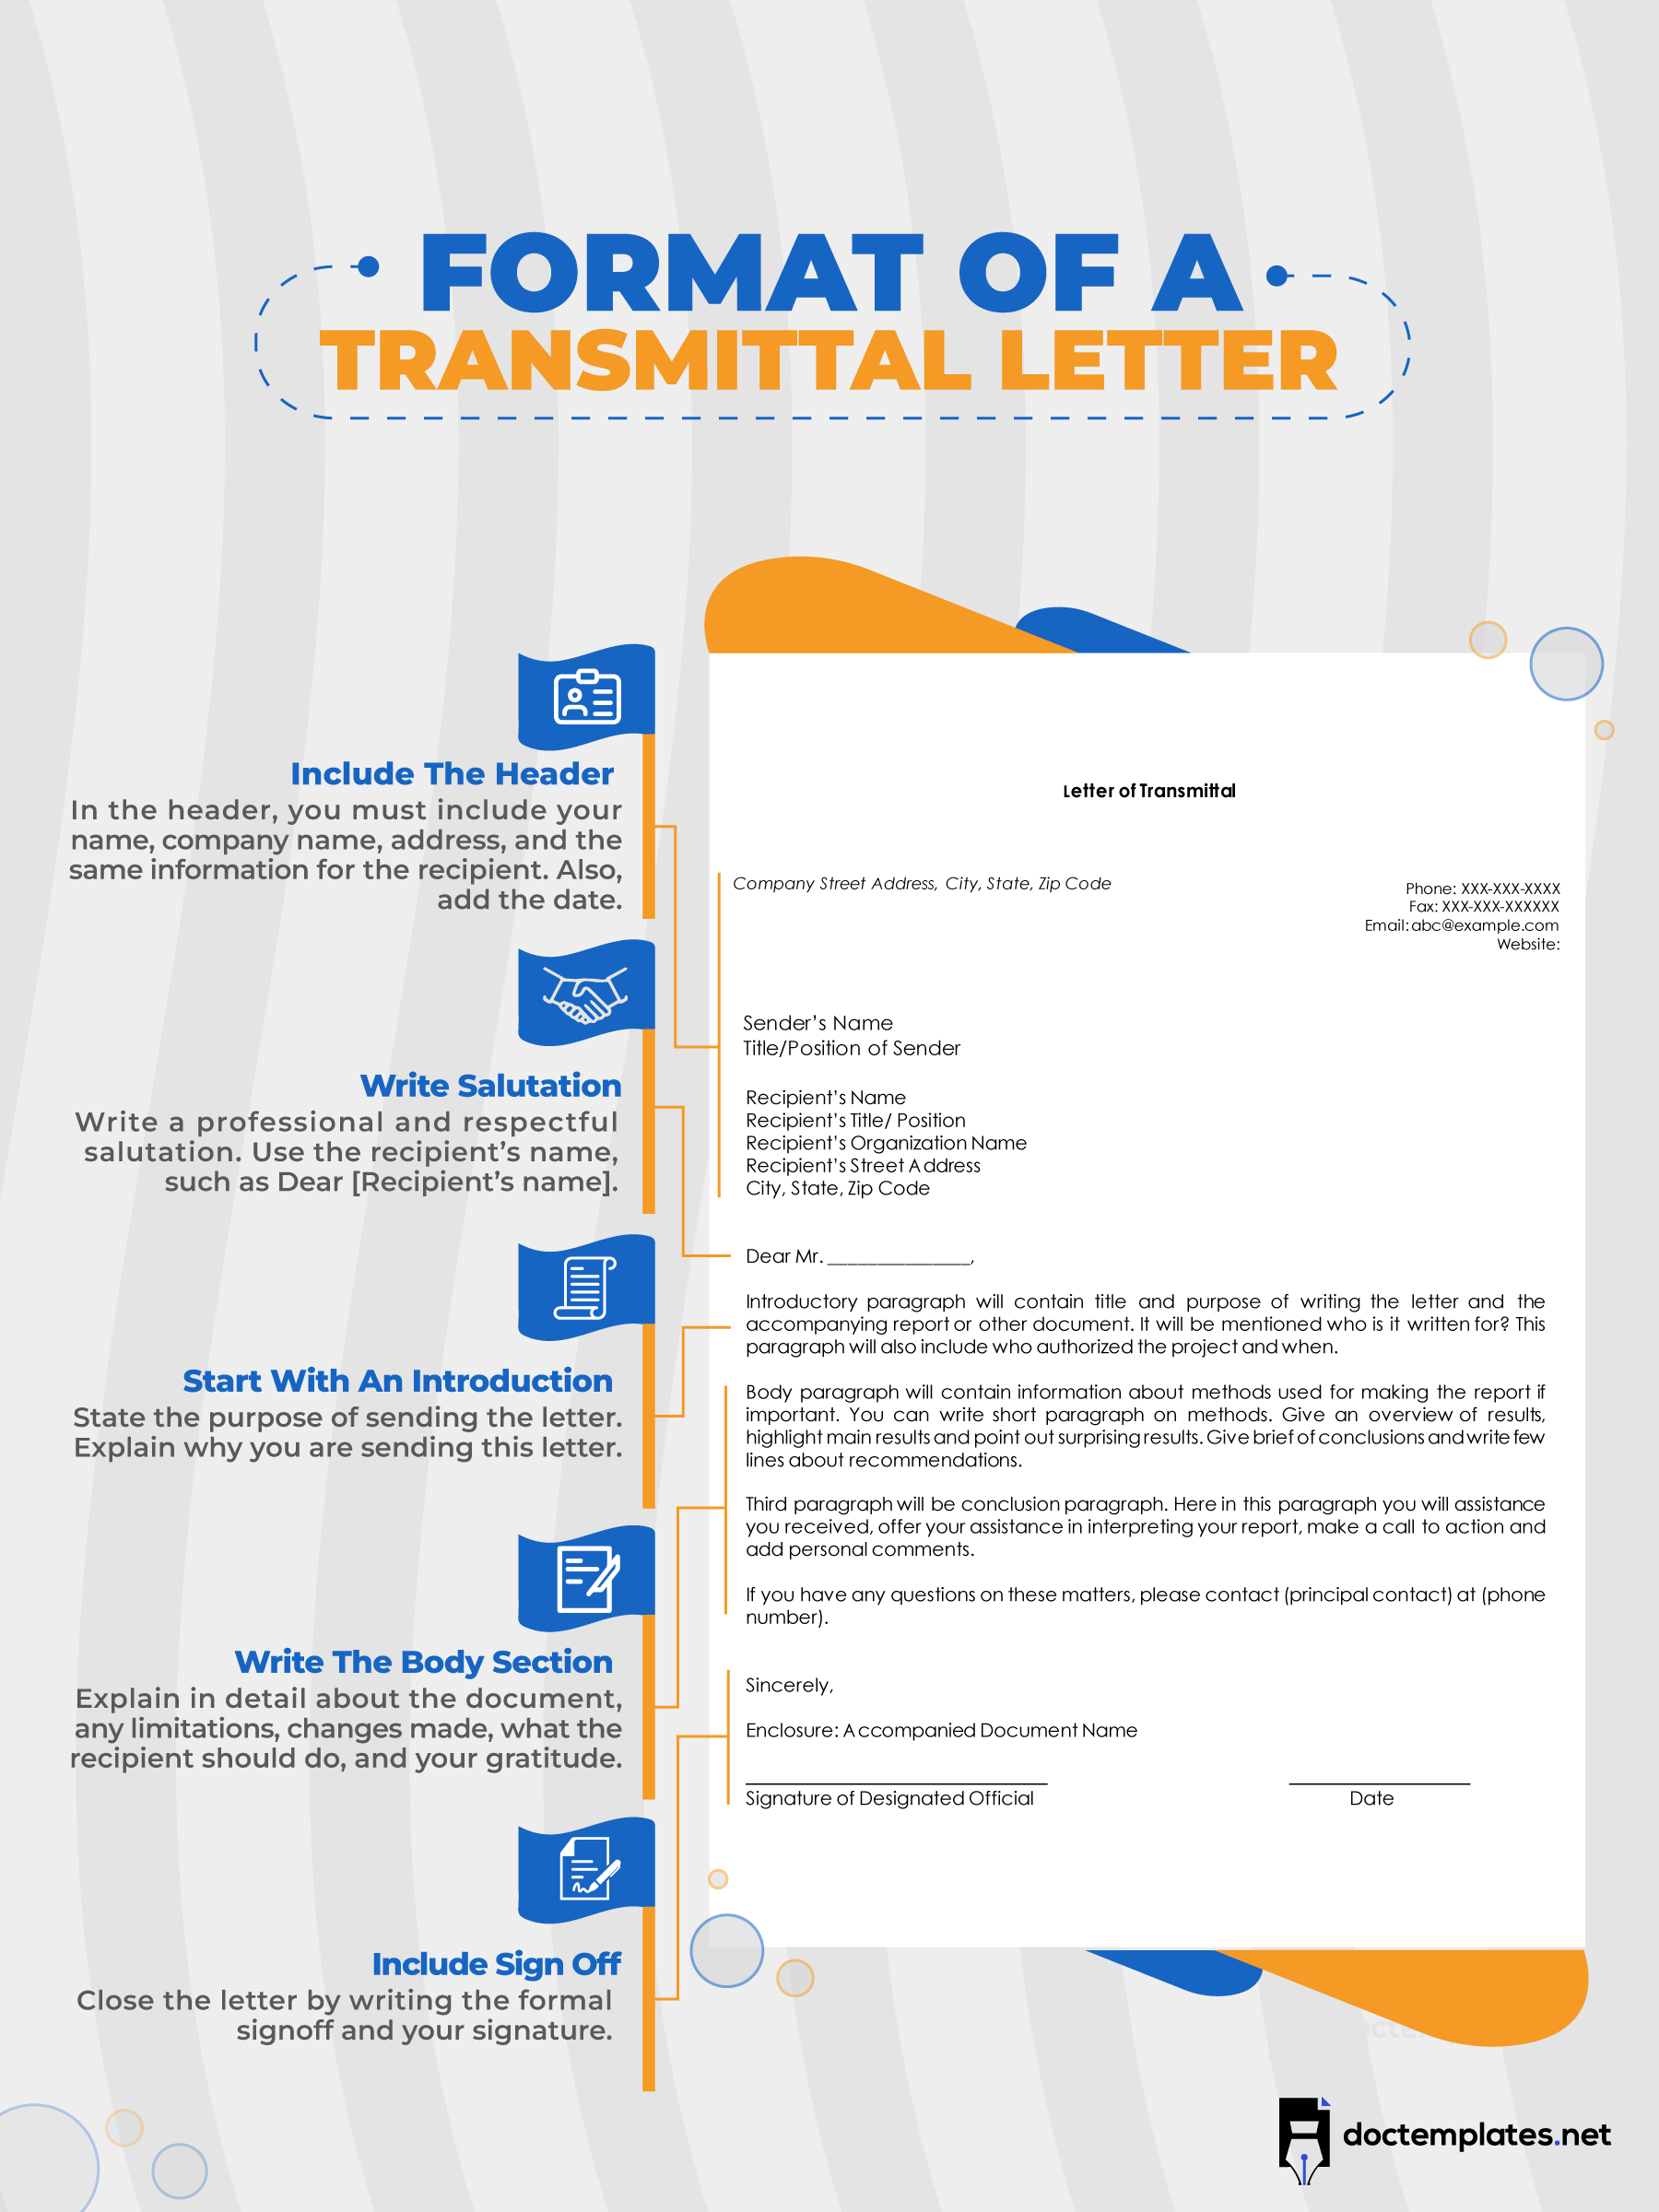 This infographic is about format of transmittal letter.